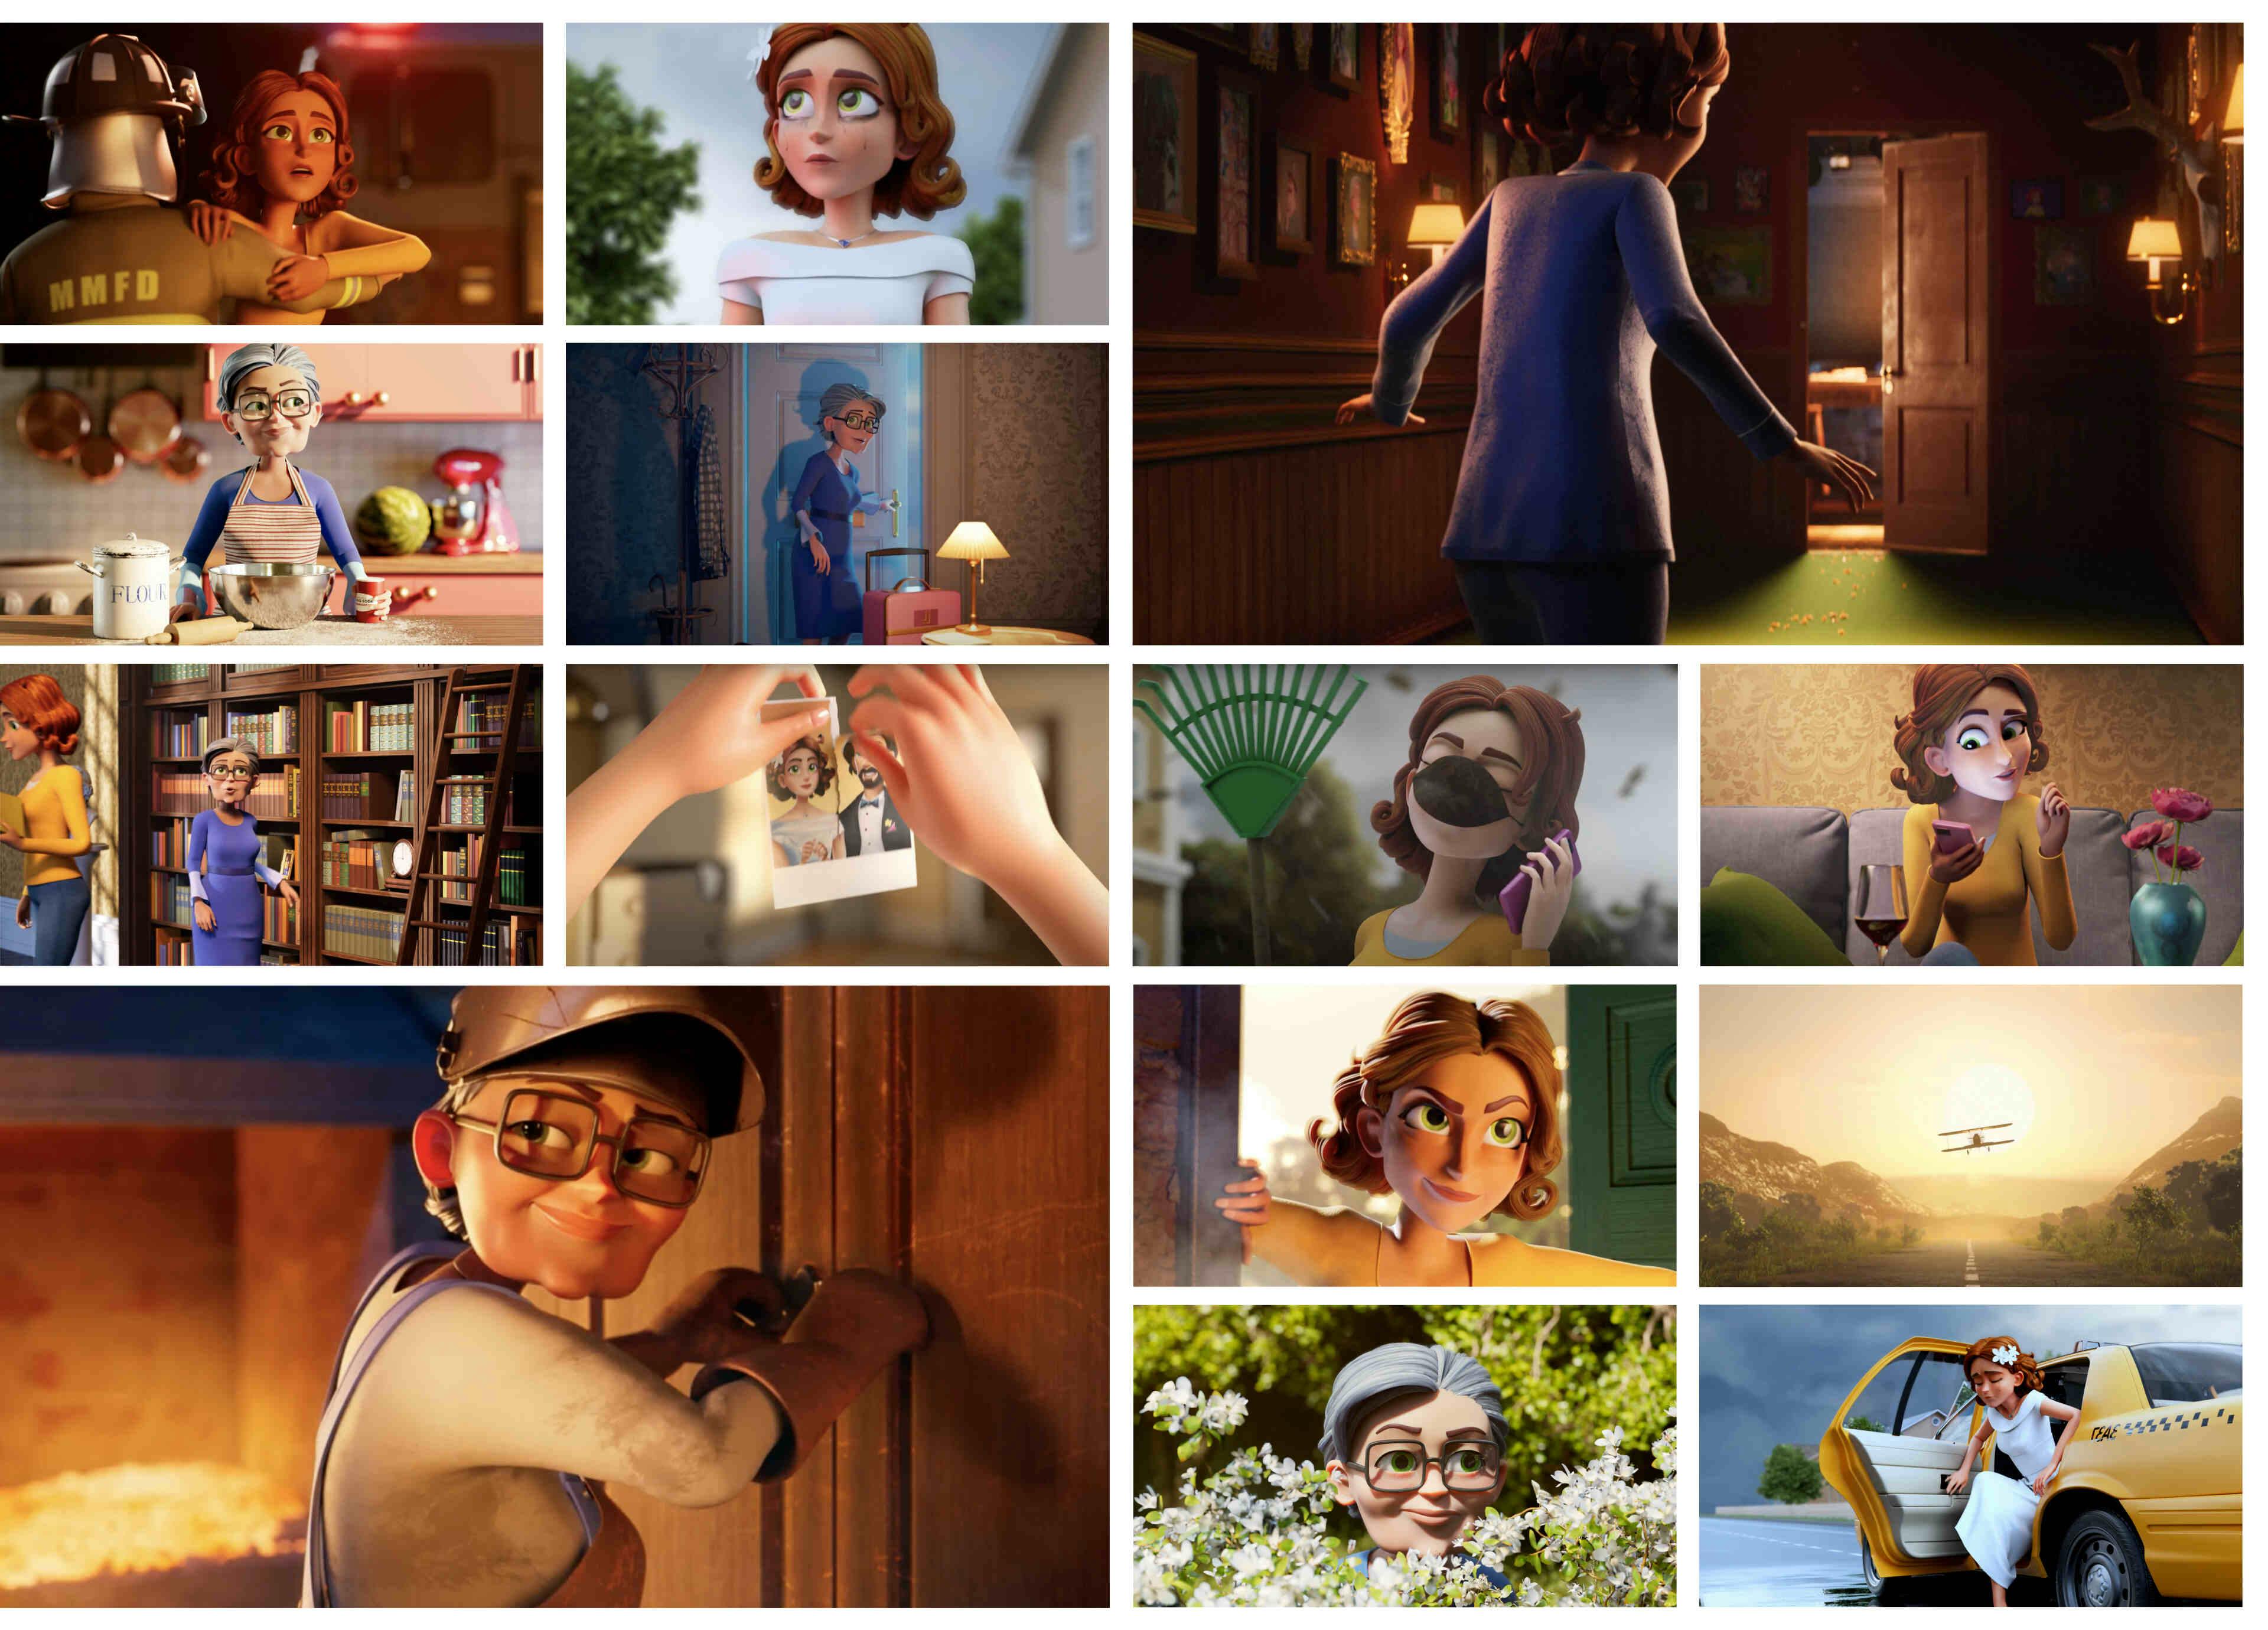 A collage of promotional images featuring Grandma and her daughter Maddie, taken from Merge Mansion.